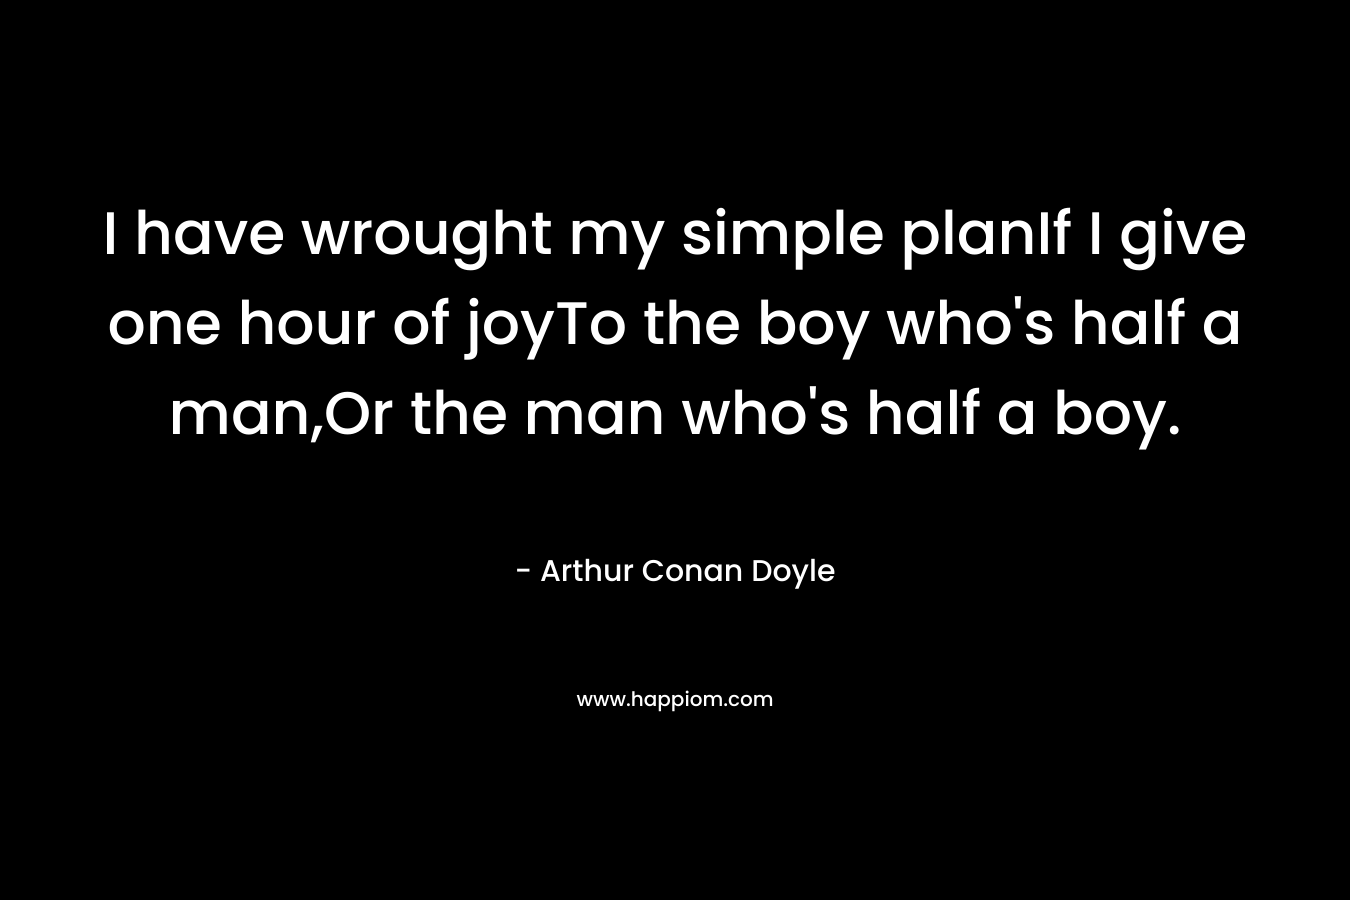 I have wrought my simple planIf I give one hour of joyTo the boy who’s half a man,Or the man who’s half a boy. – Arthur Conan Doyle